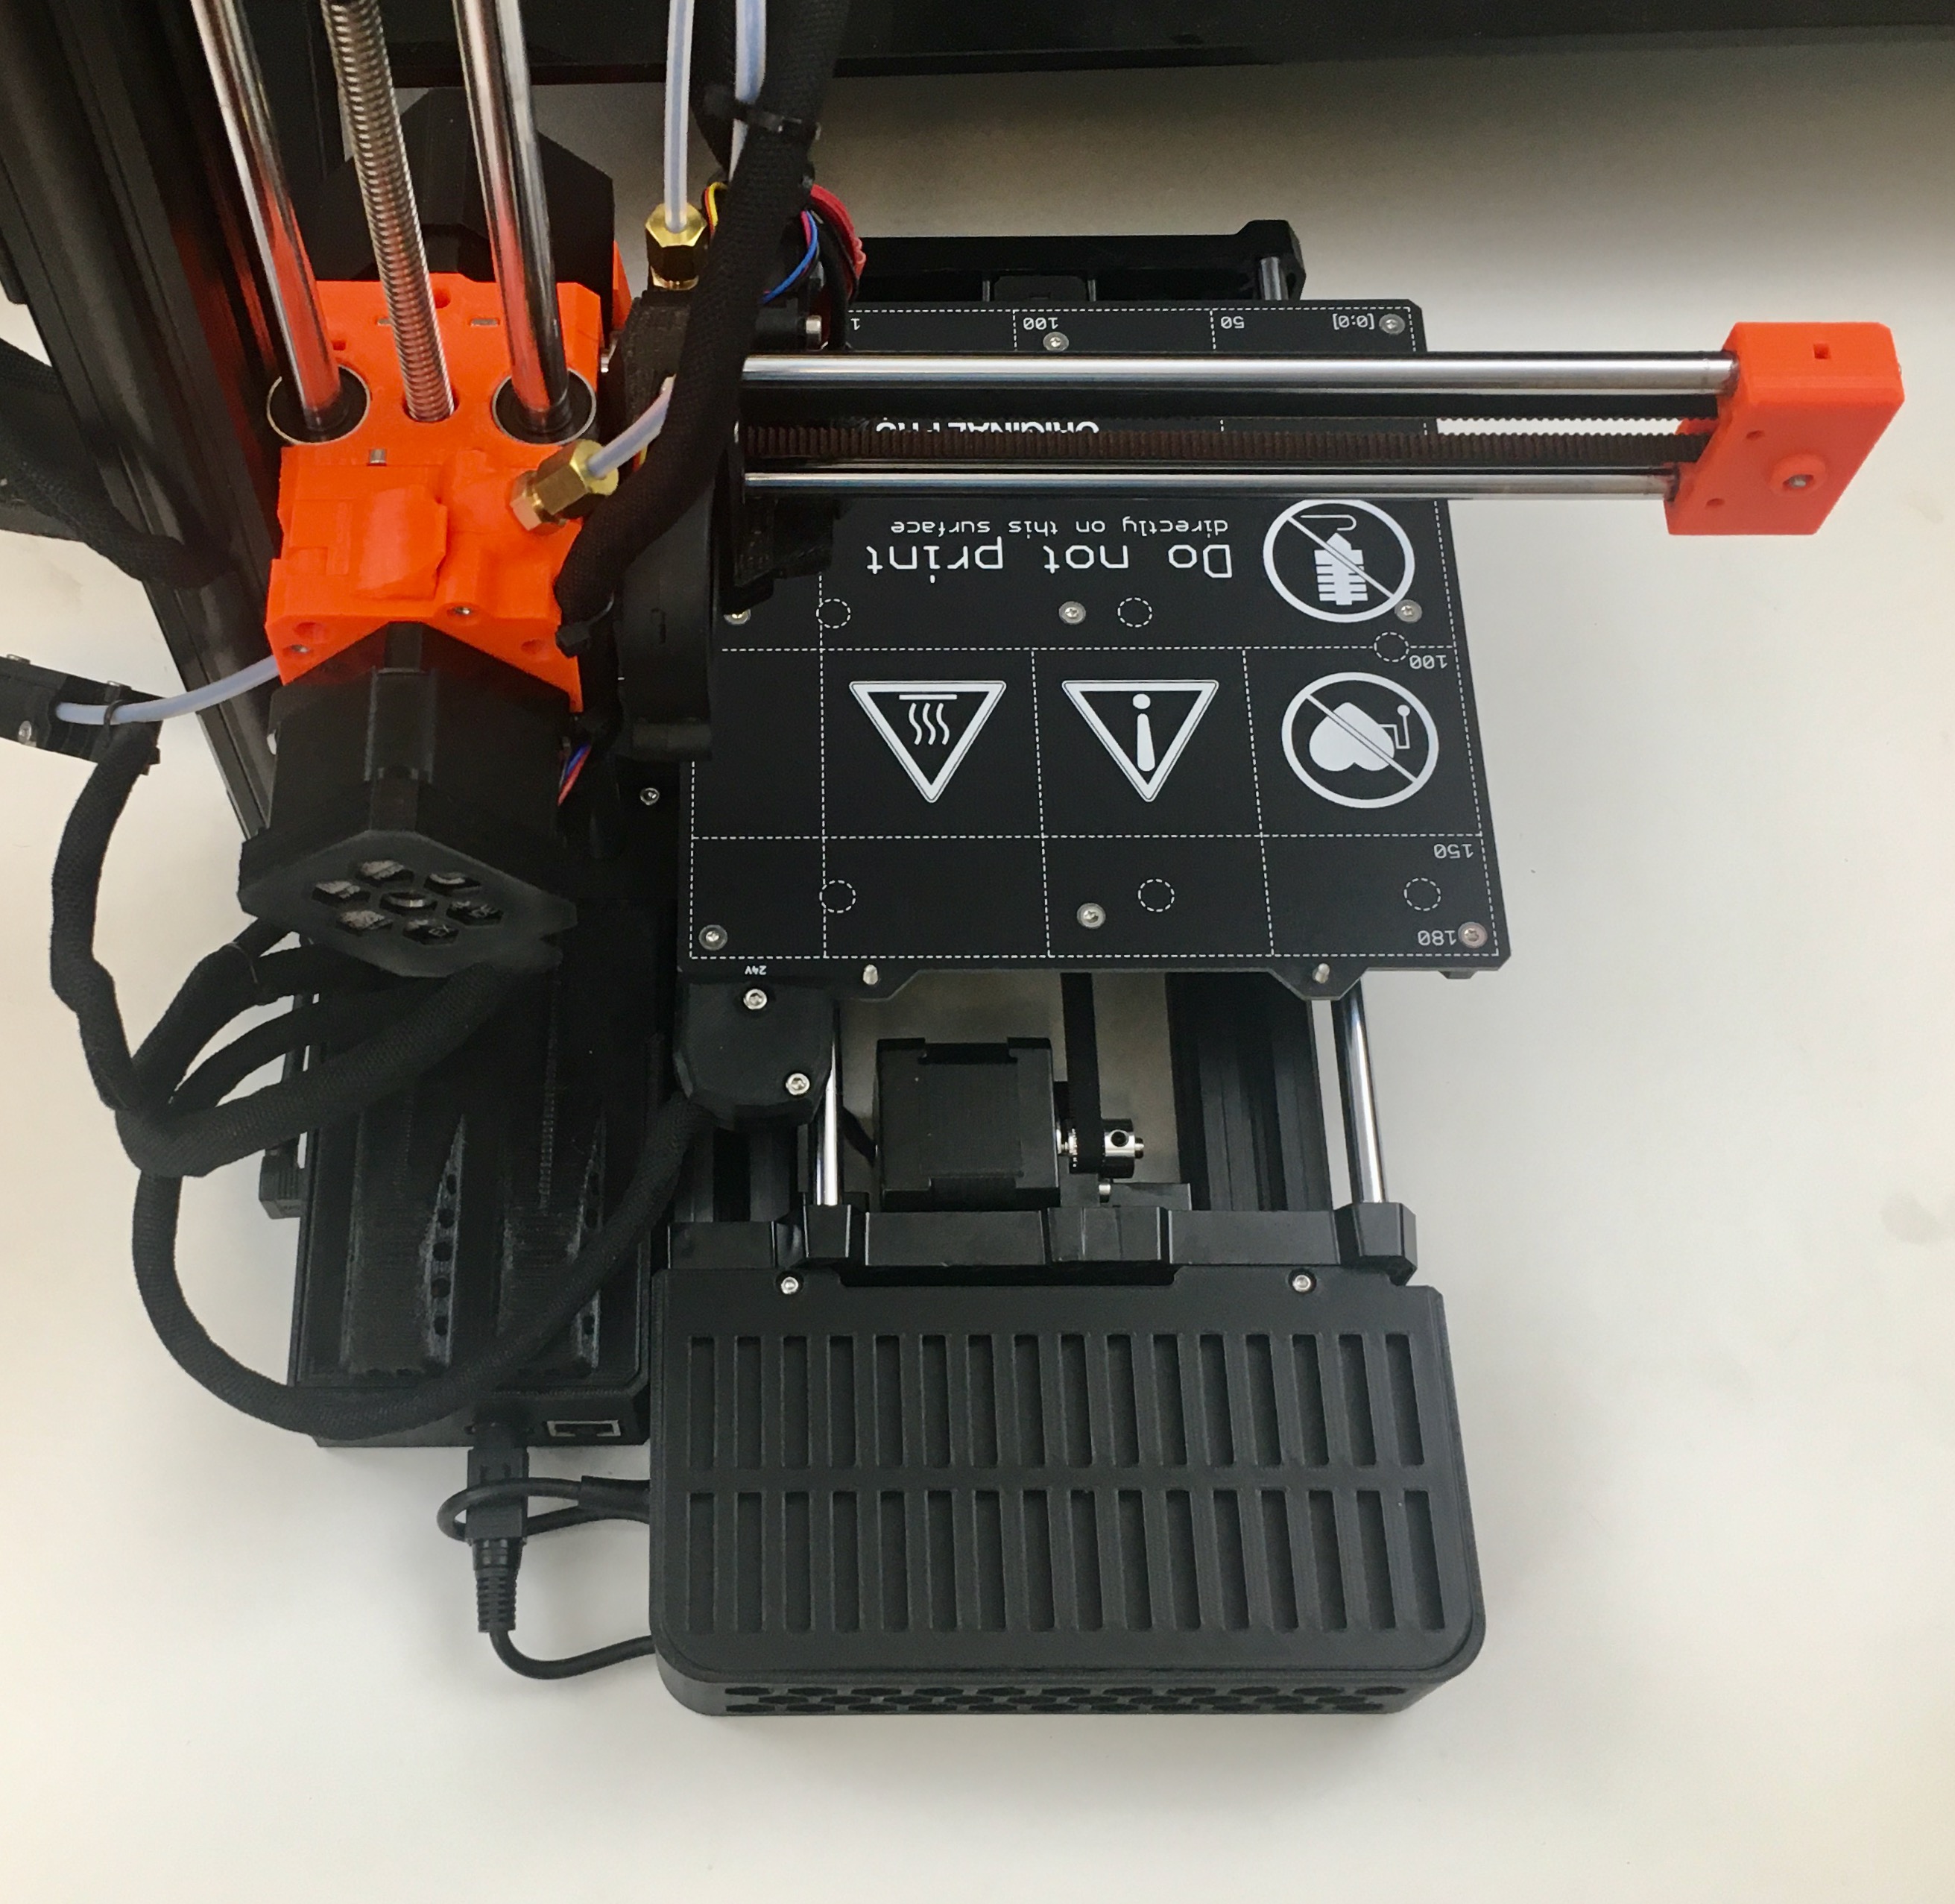 Power supply enclosure attached to Prusa Mini+